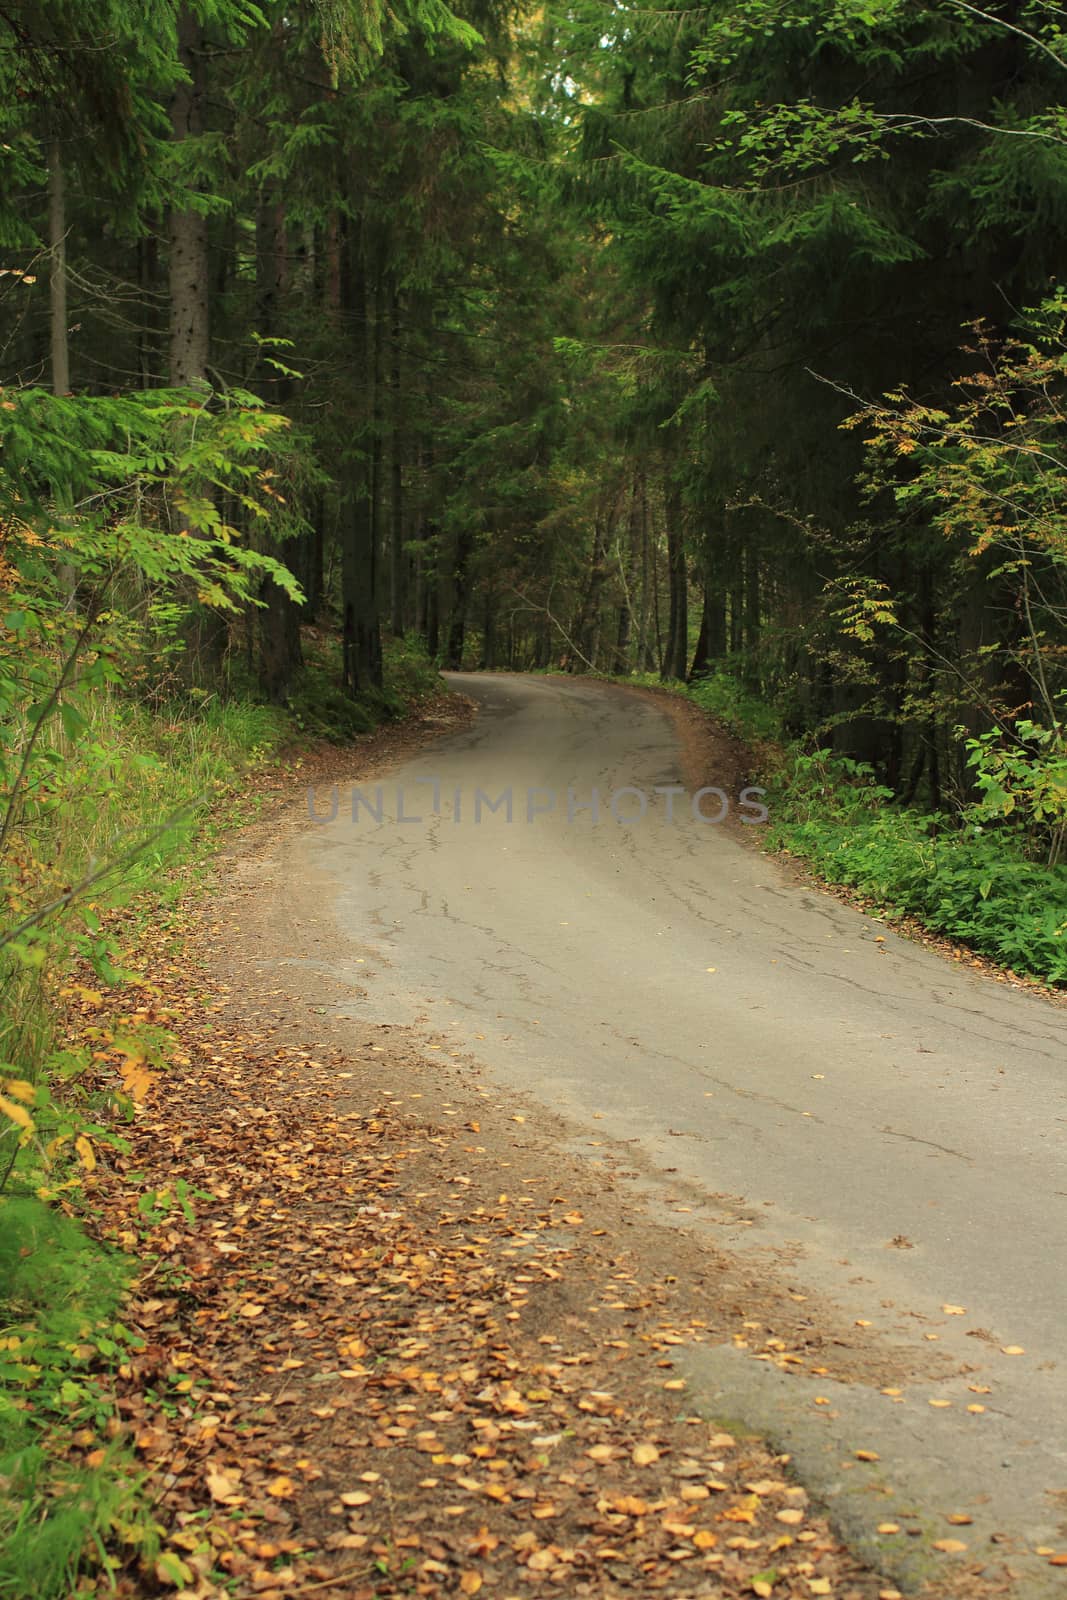 trip winding forest road in autumn, go the distance